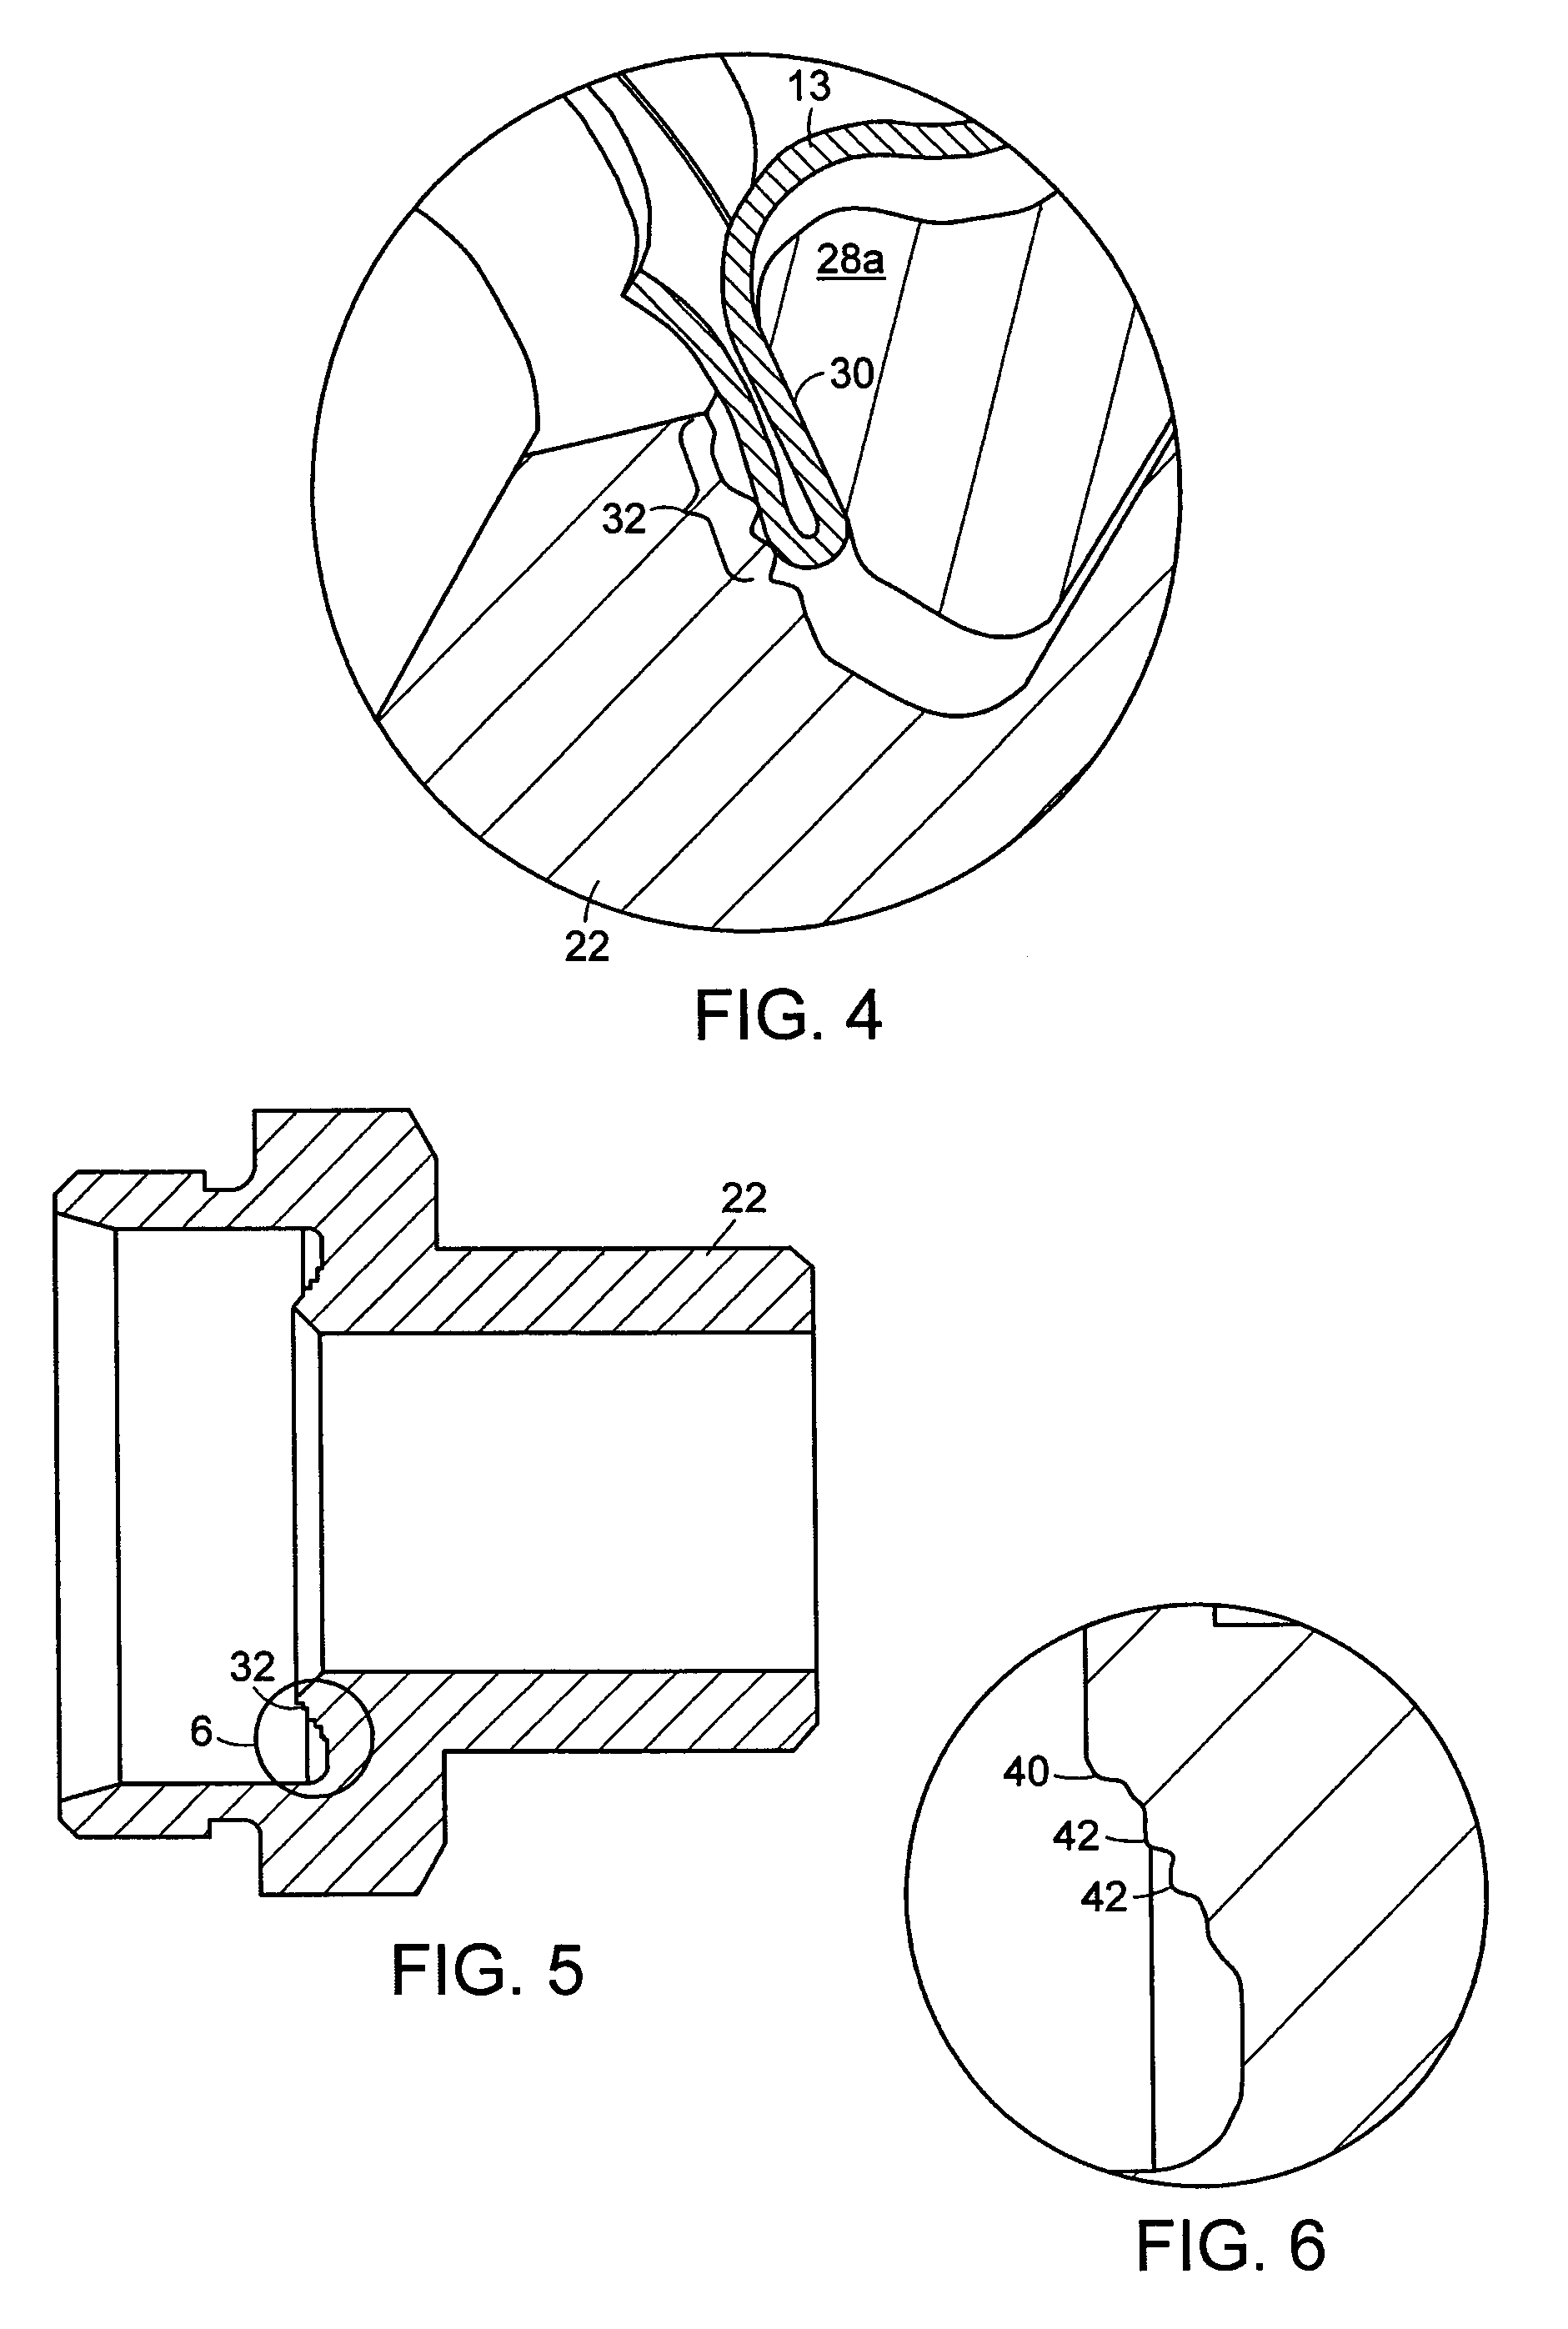 Sealing device with ridges for corrugated stainless steel tubing